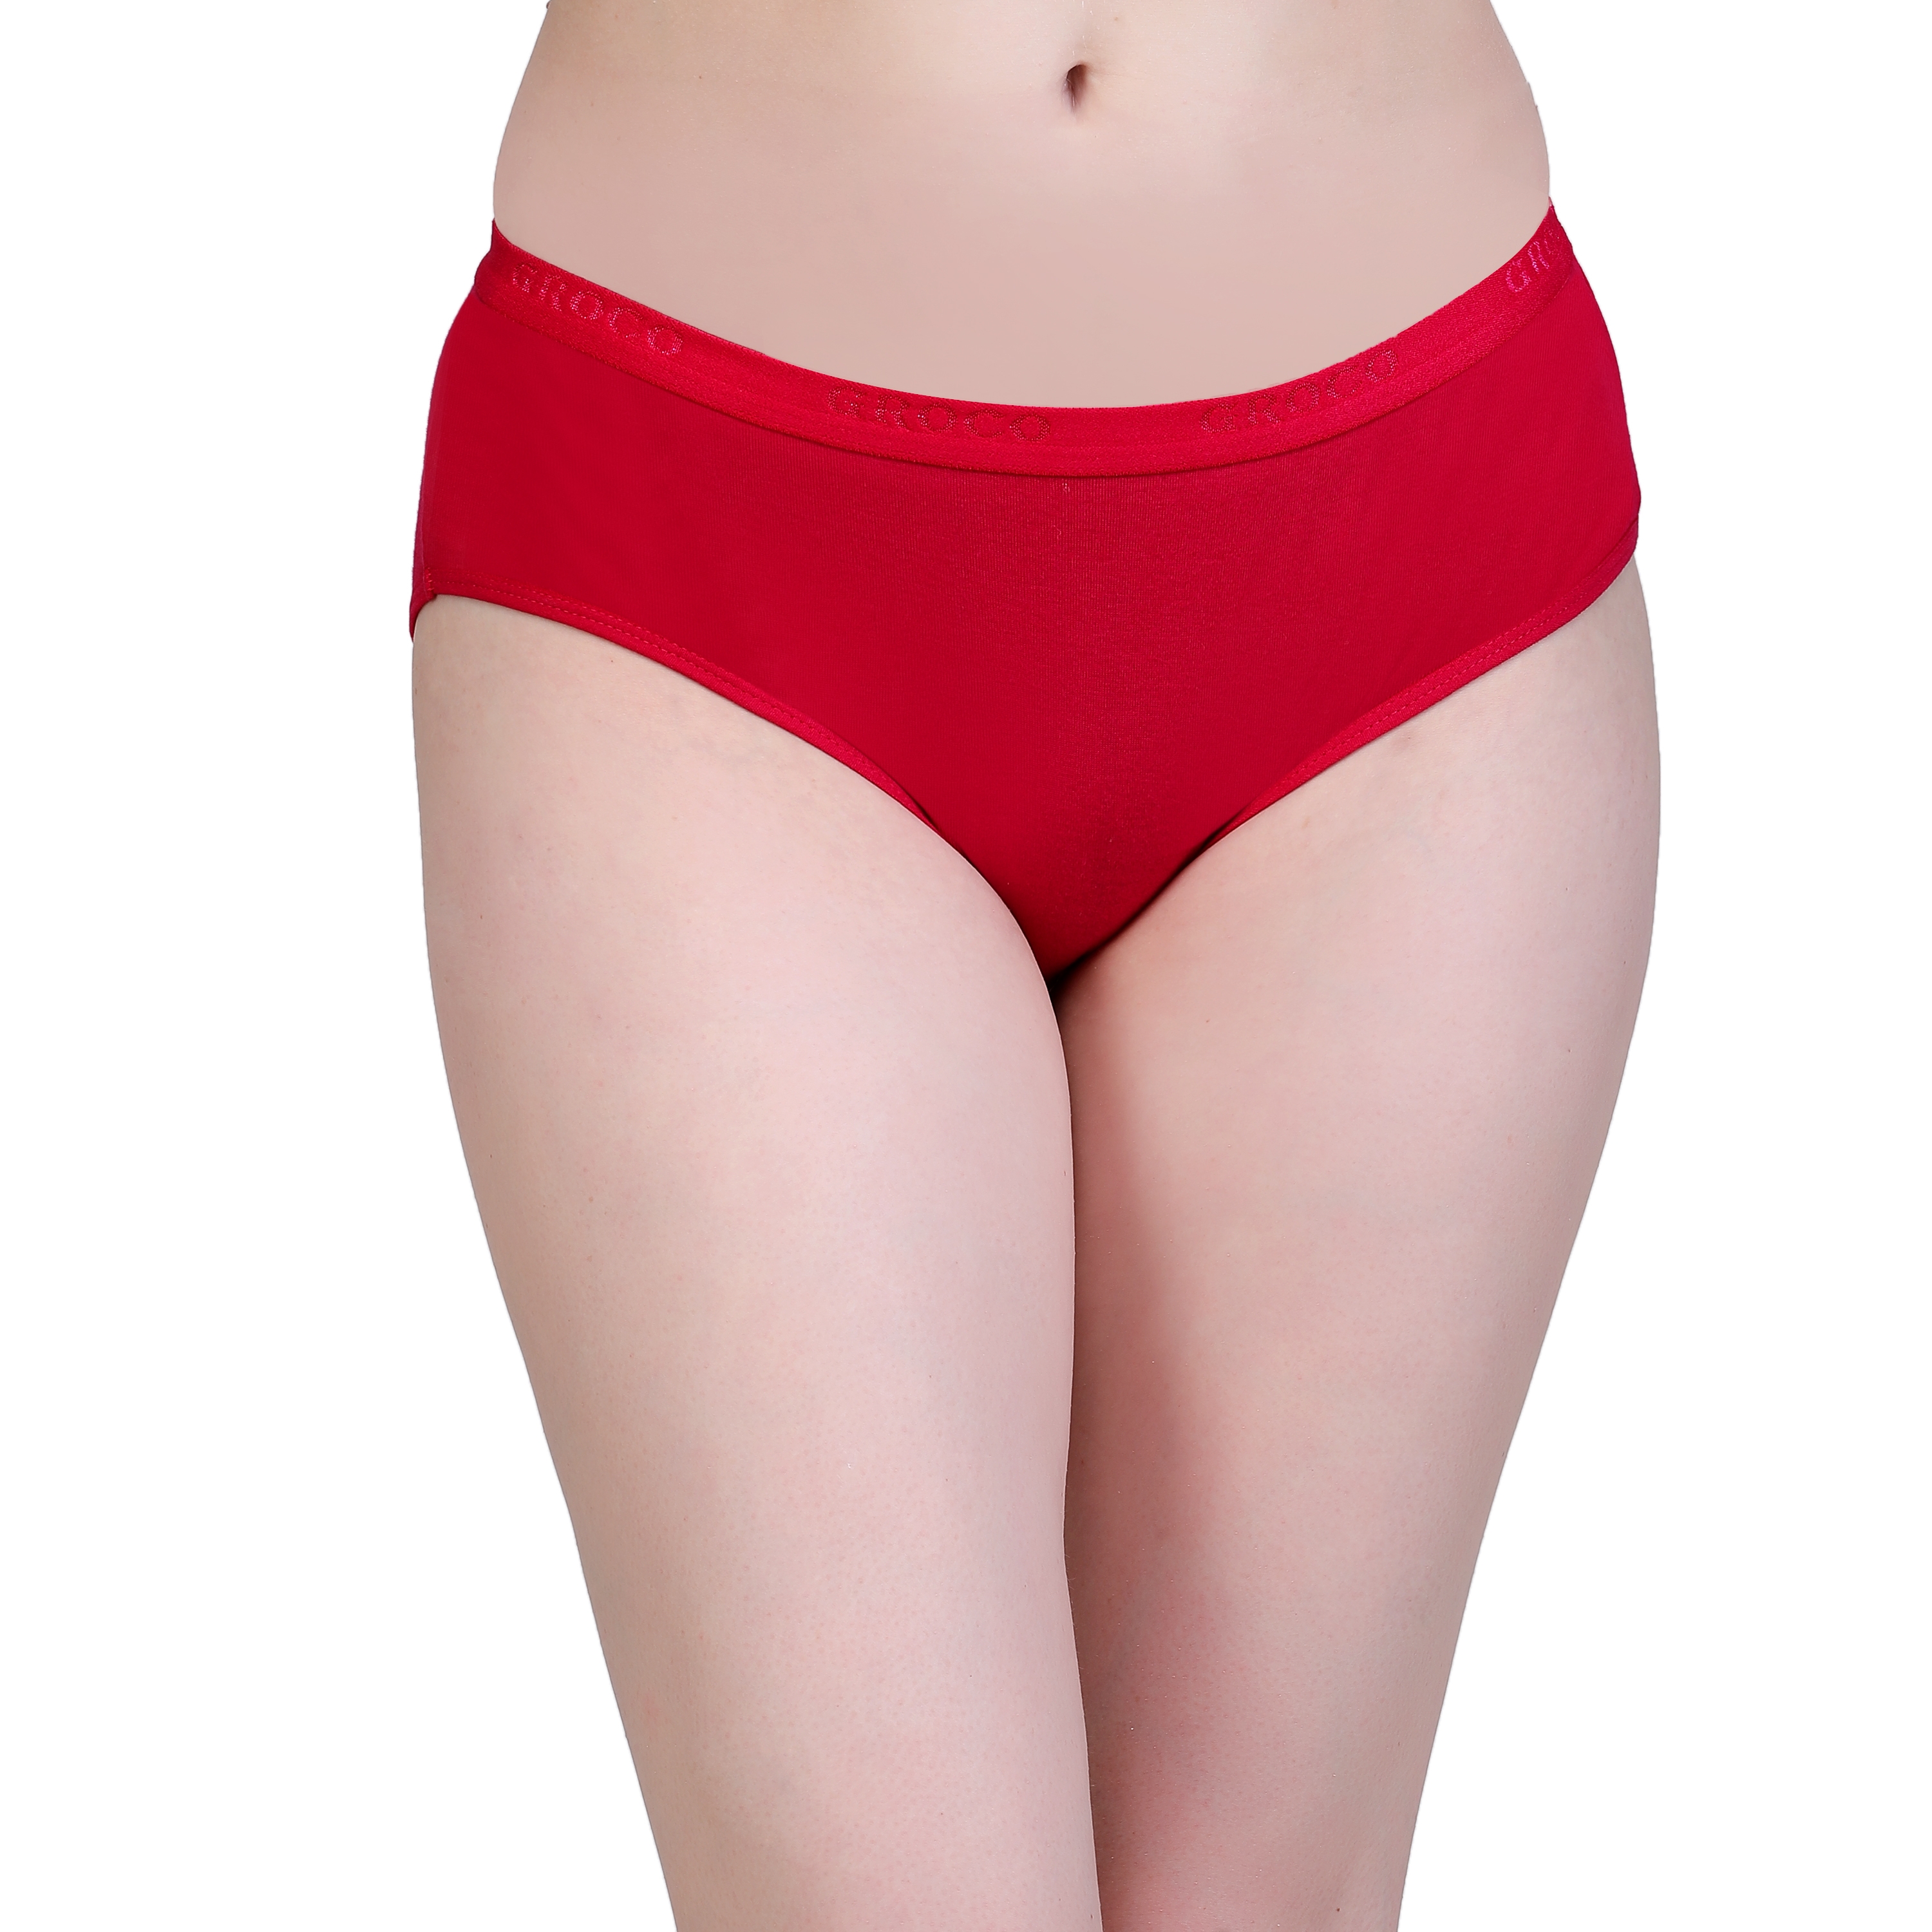 PEACH SMILE | PEACH SMILE Hipster Panties for Women 1